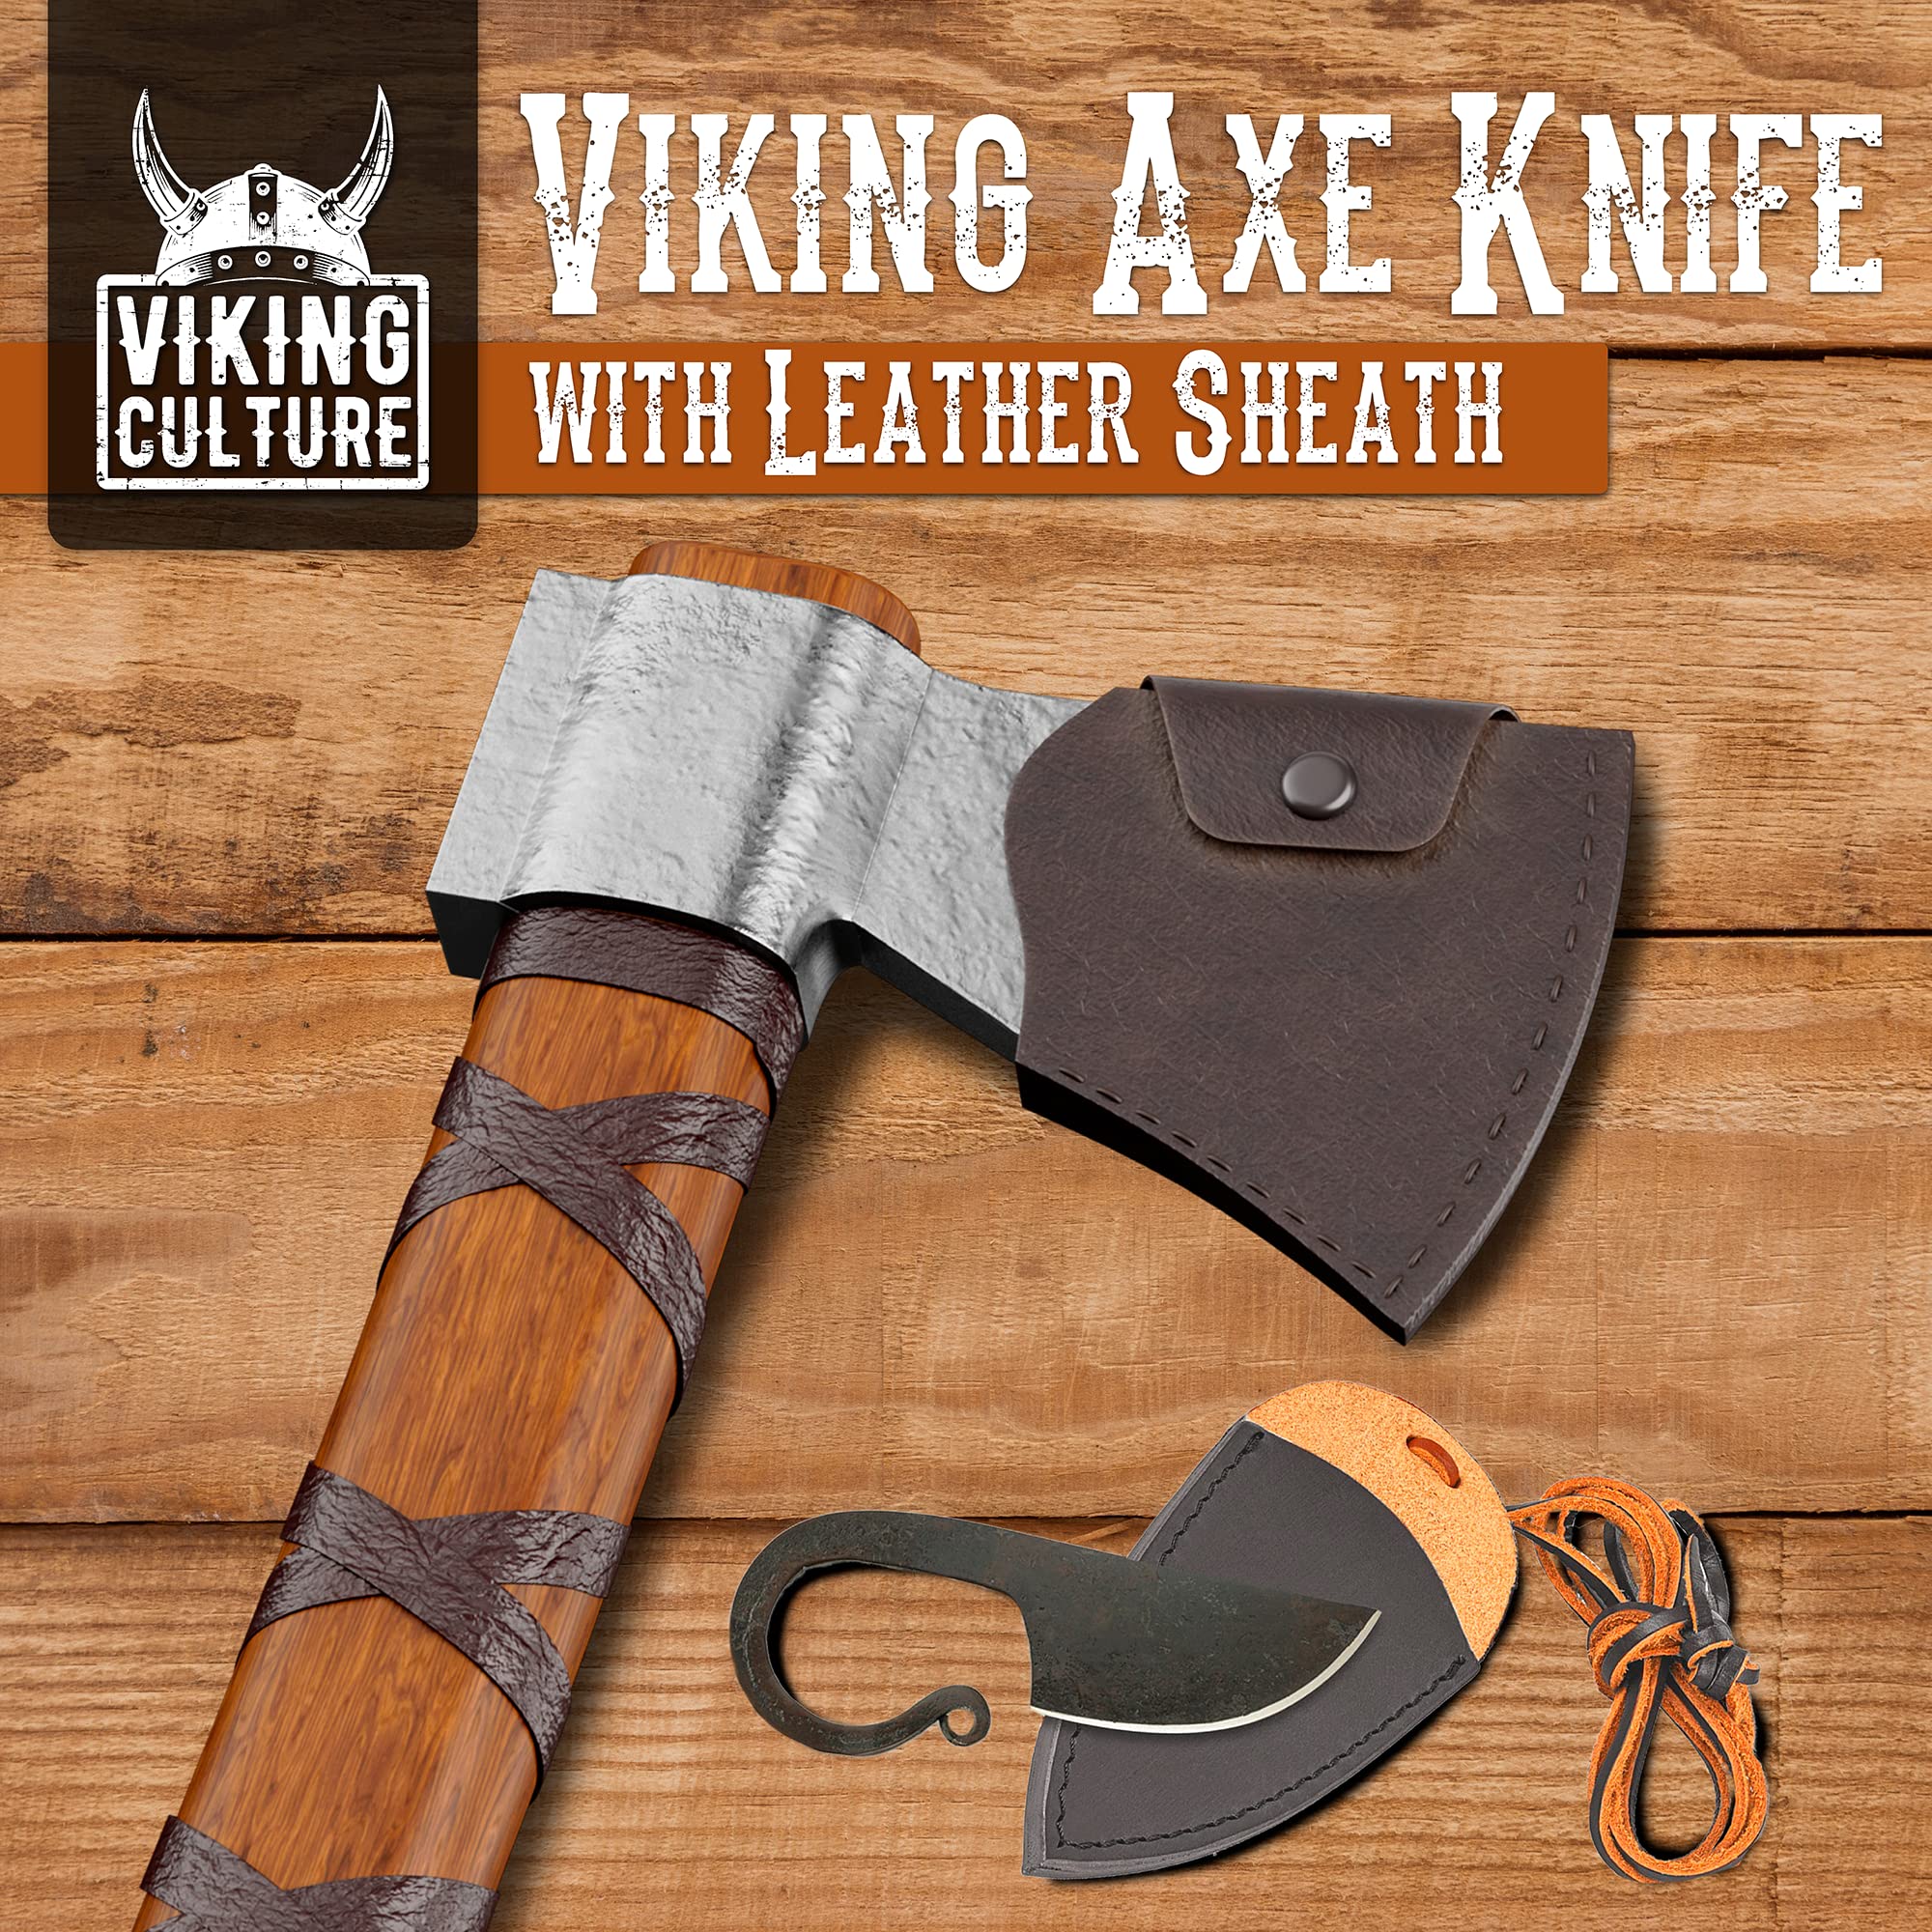 Viking Throwing Axe with Leather Sheath, Battle Hatchet, 14" Viking Axe, Real Viking Axe Weapon with Celtic Ring Knife Set, Viking Weapons for Survival or Target Throwing, Rustic & Dependable Weapons